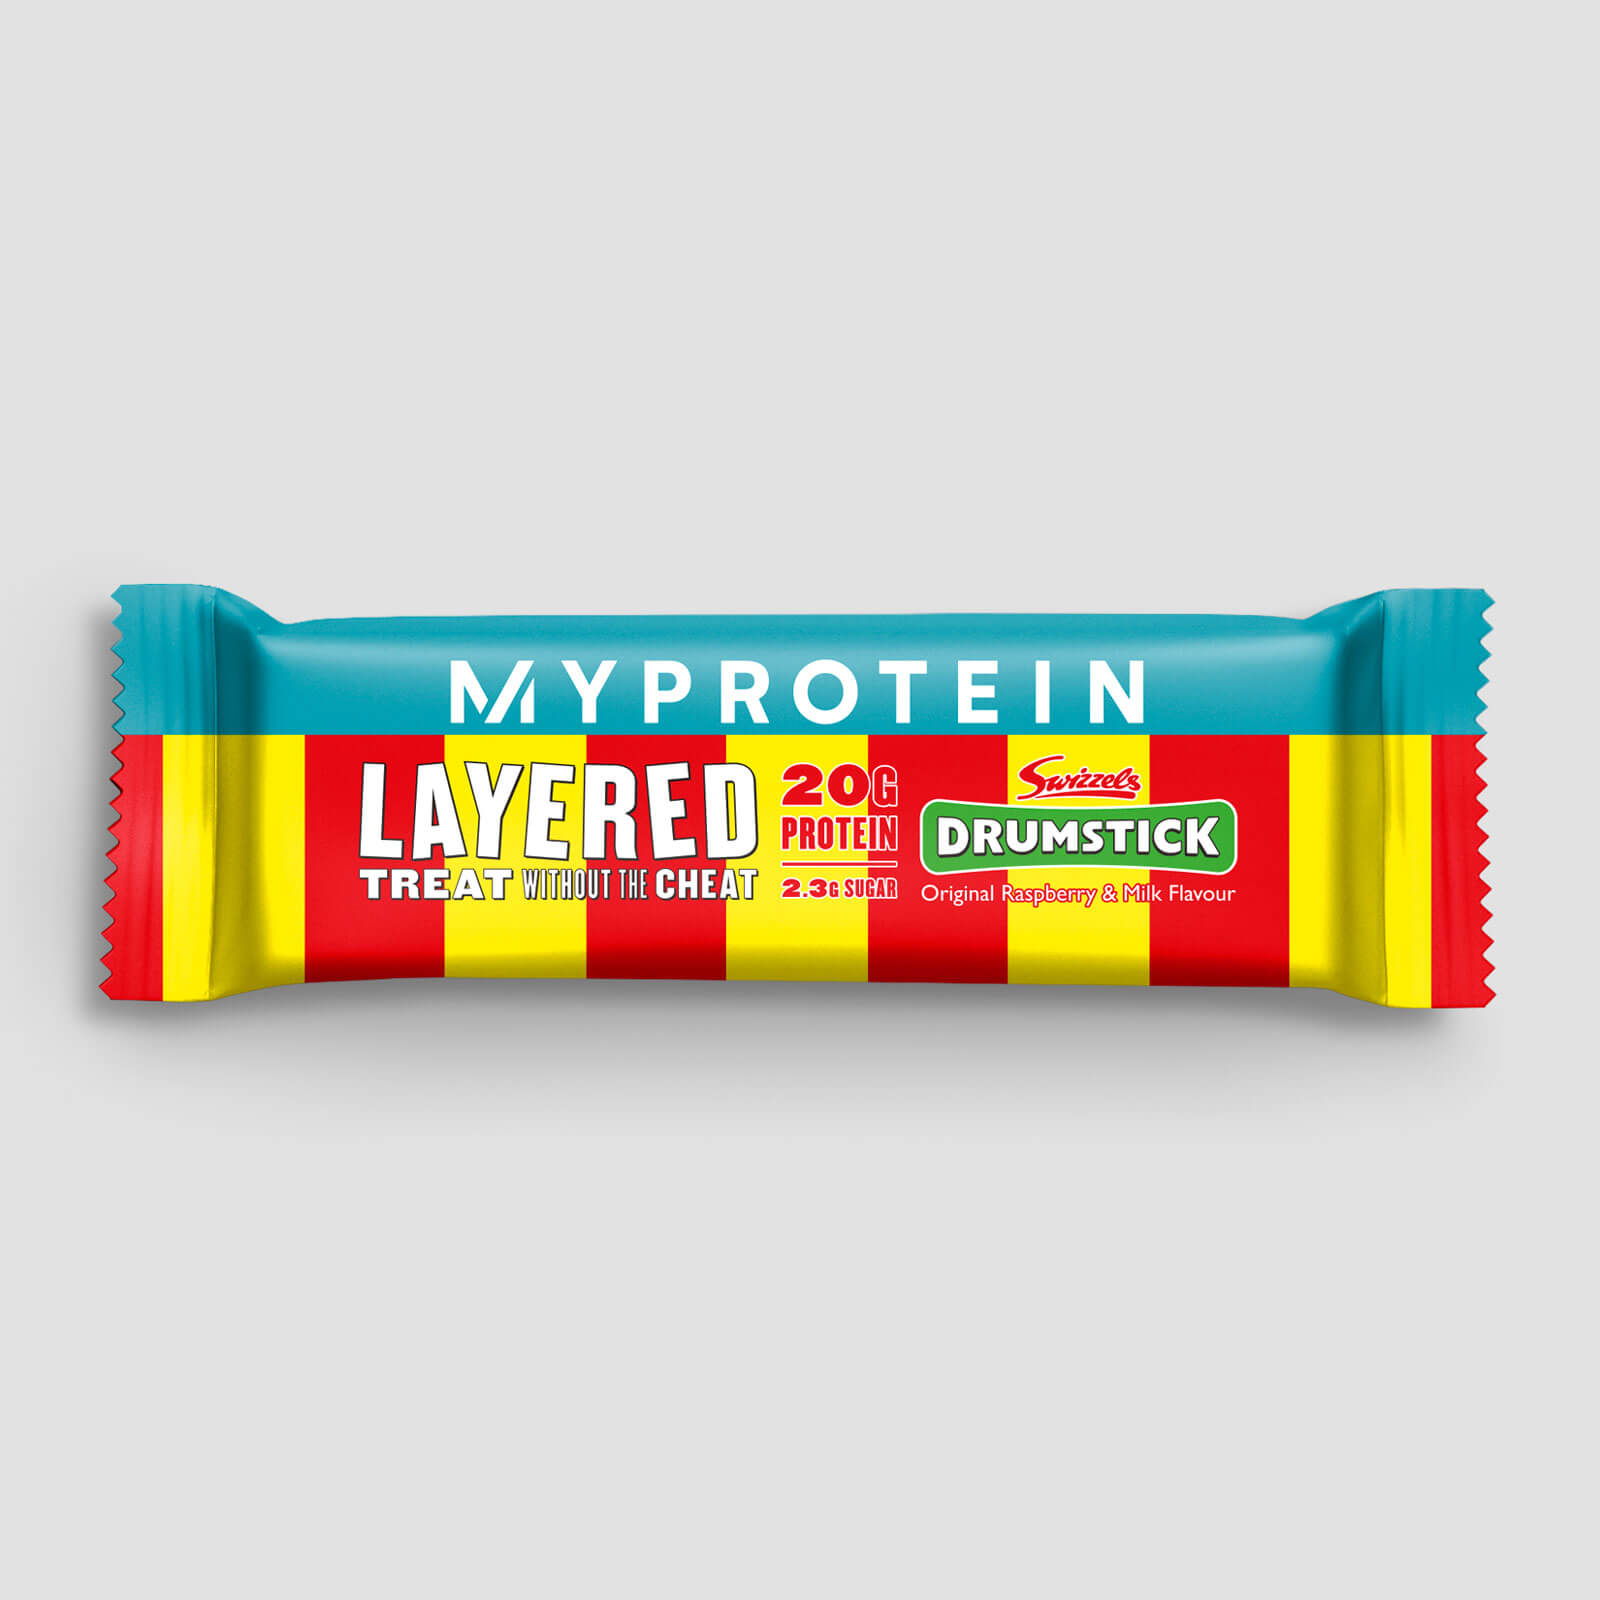 Layered Protein Bar — Drumstick (Sample) - Swizzels Drumstick